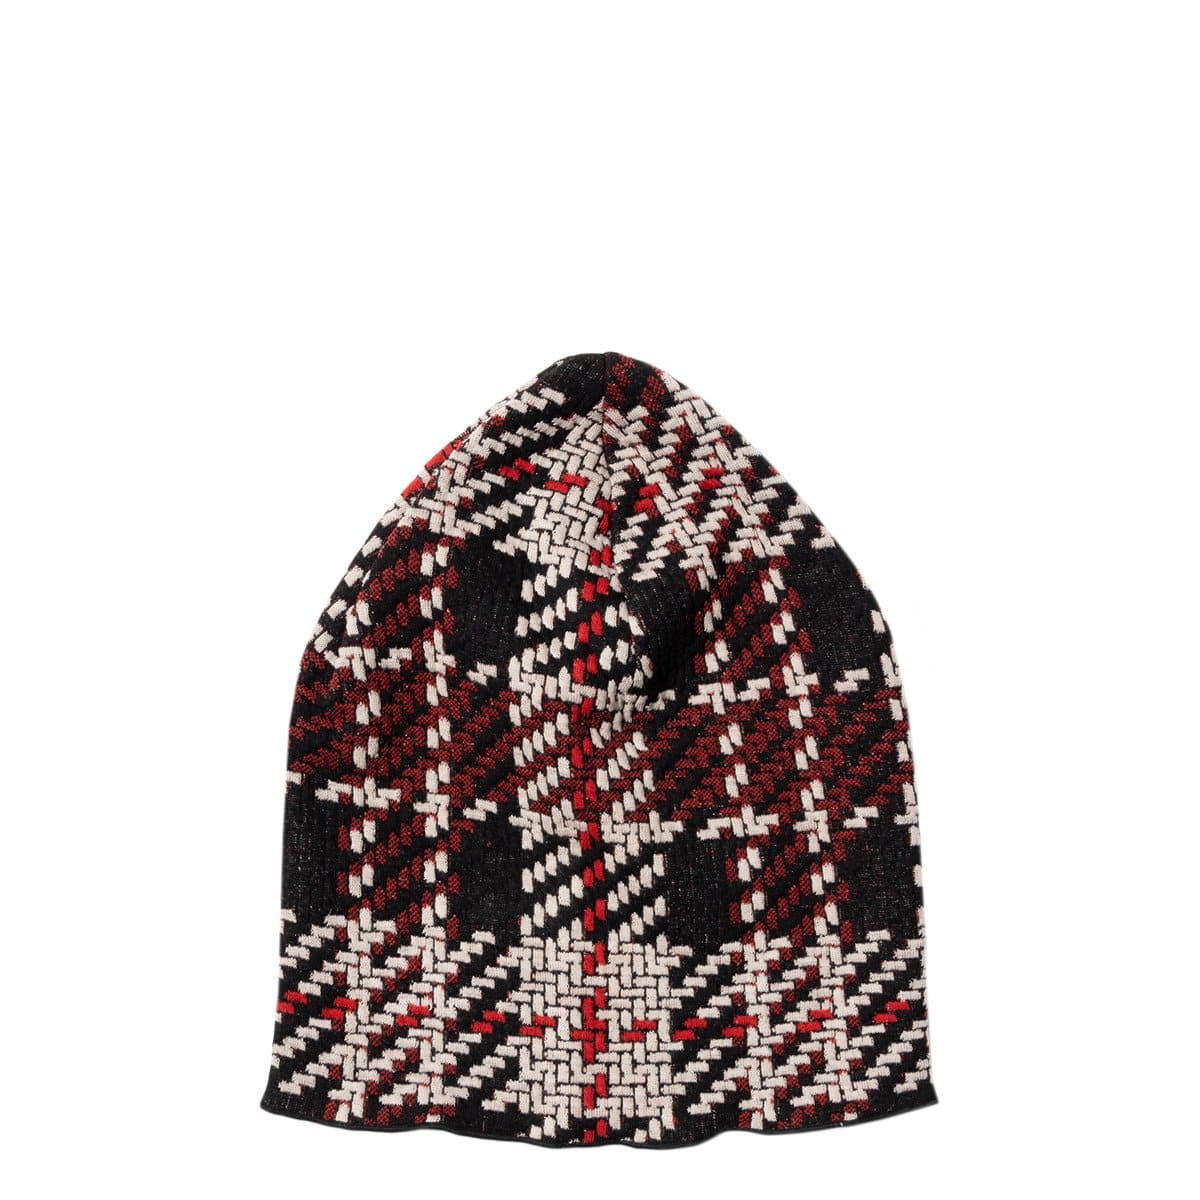 Engineered Garments Bags & Accessories BLACK/RED TWEED KNIT / OS KNIT BEANIE CAP